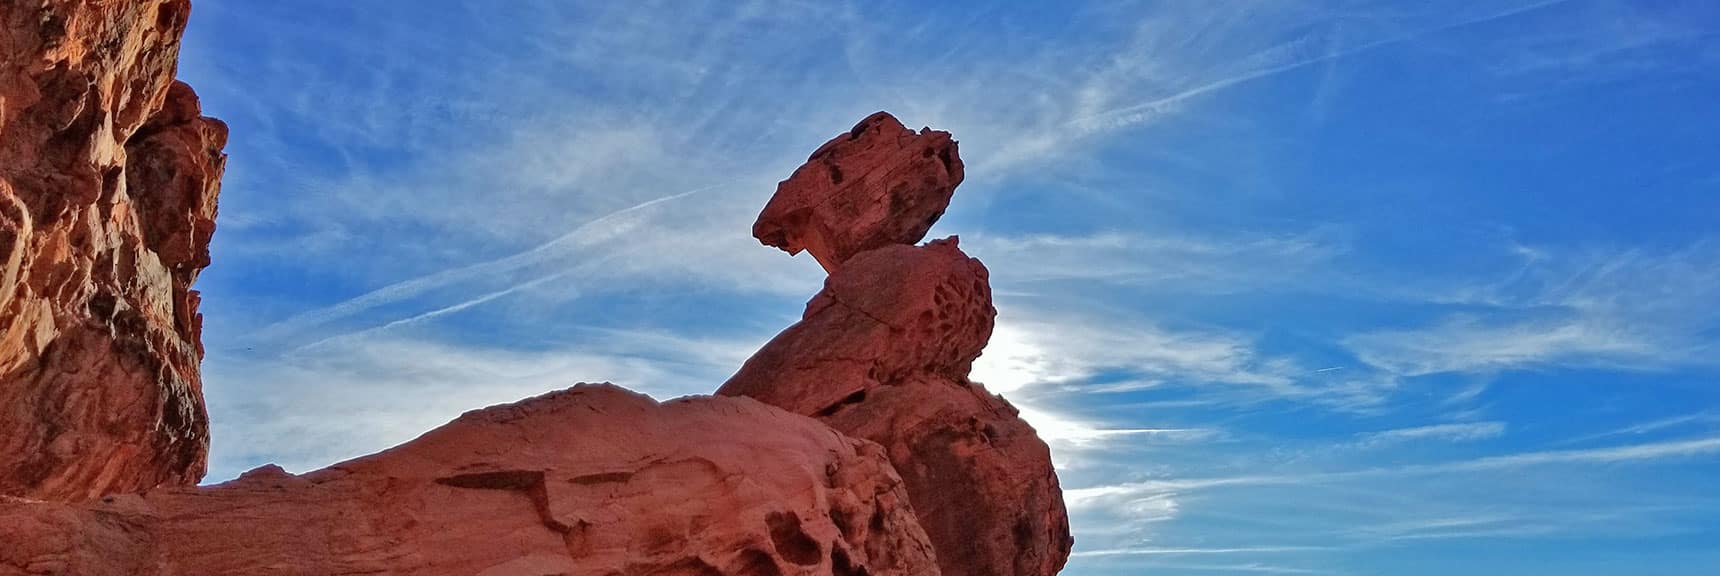 Balancing Rock in Valley of Fire State Park, Nevada, View from Far Side of Rock